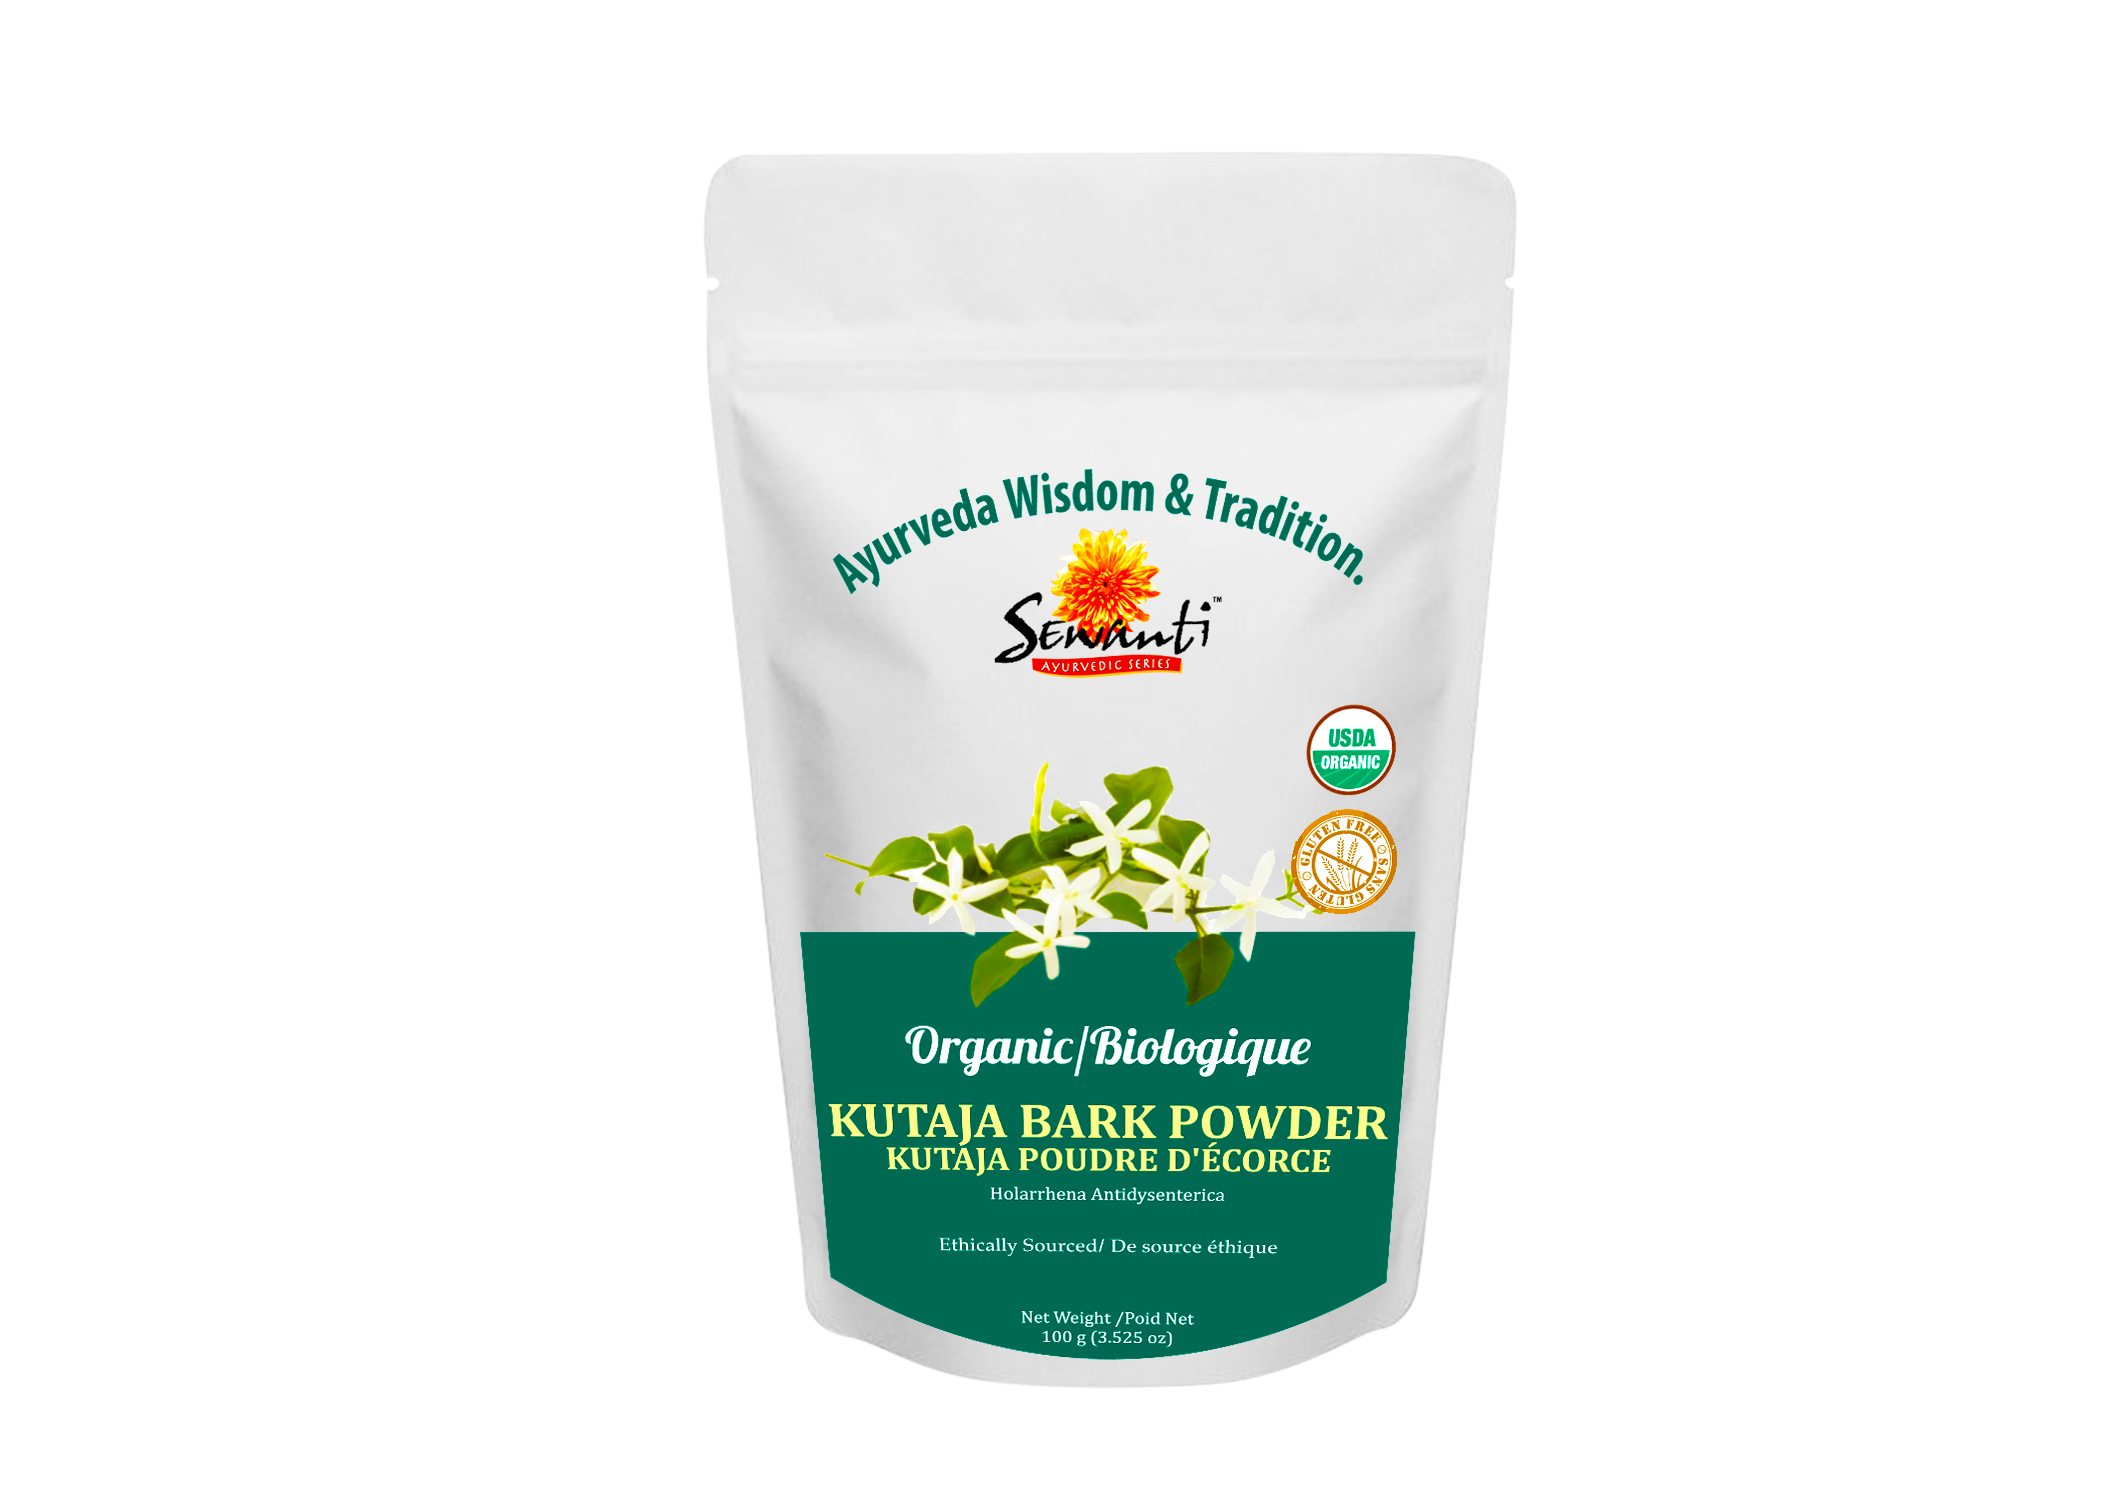 Organic Kutaja Bark Powder - The word "Sewanti" means, "service with devotion." Our company is committed to providing the highest quality, authentic ayurvedic products available.